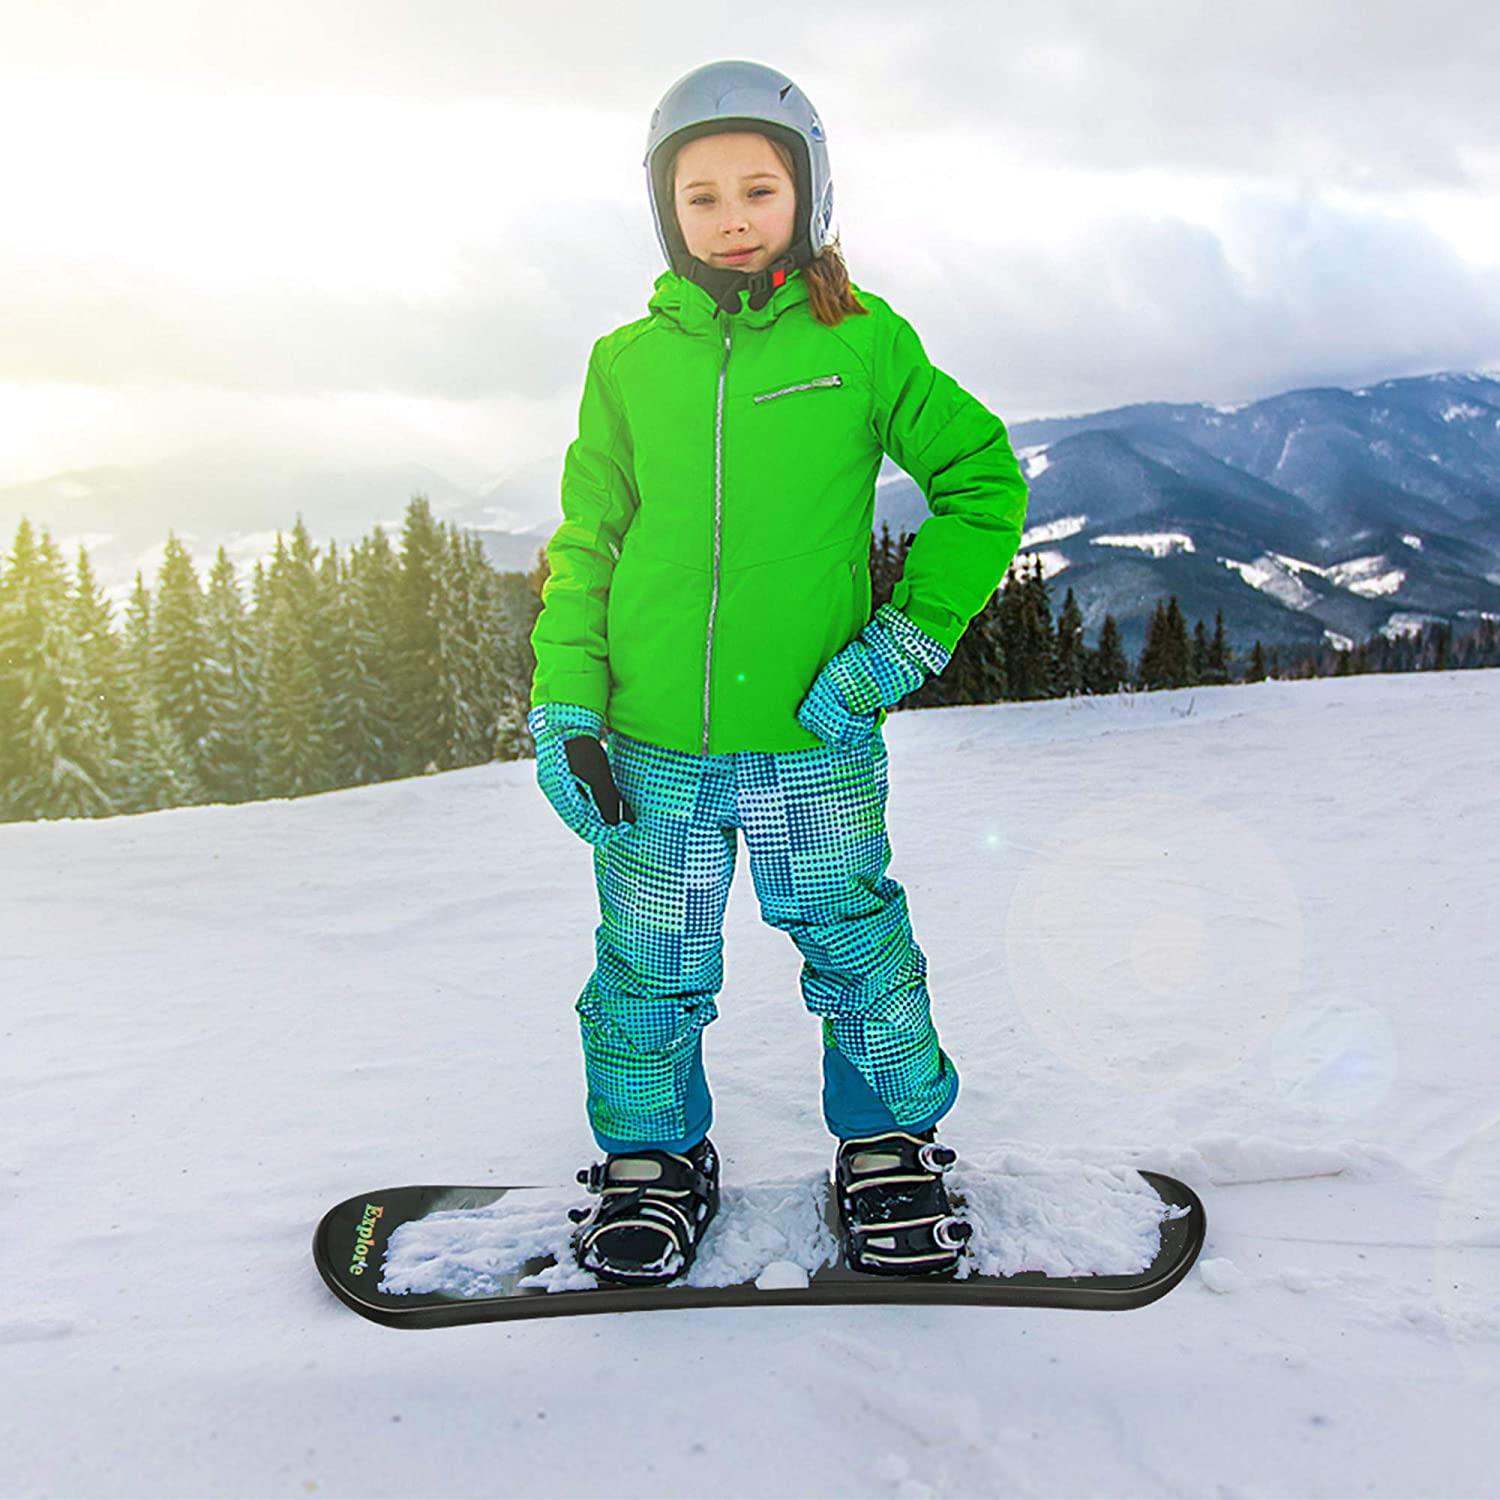 Snowboard for Kids Beginners - Adjustable Step-in Bindings Winter Sport Ski Snow Board - 44 inches Length + Ages 5 to 18 + Weight Limit 120 lbs - Bosonshop